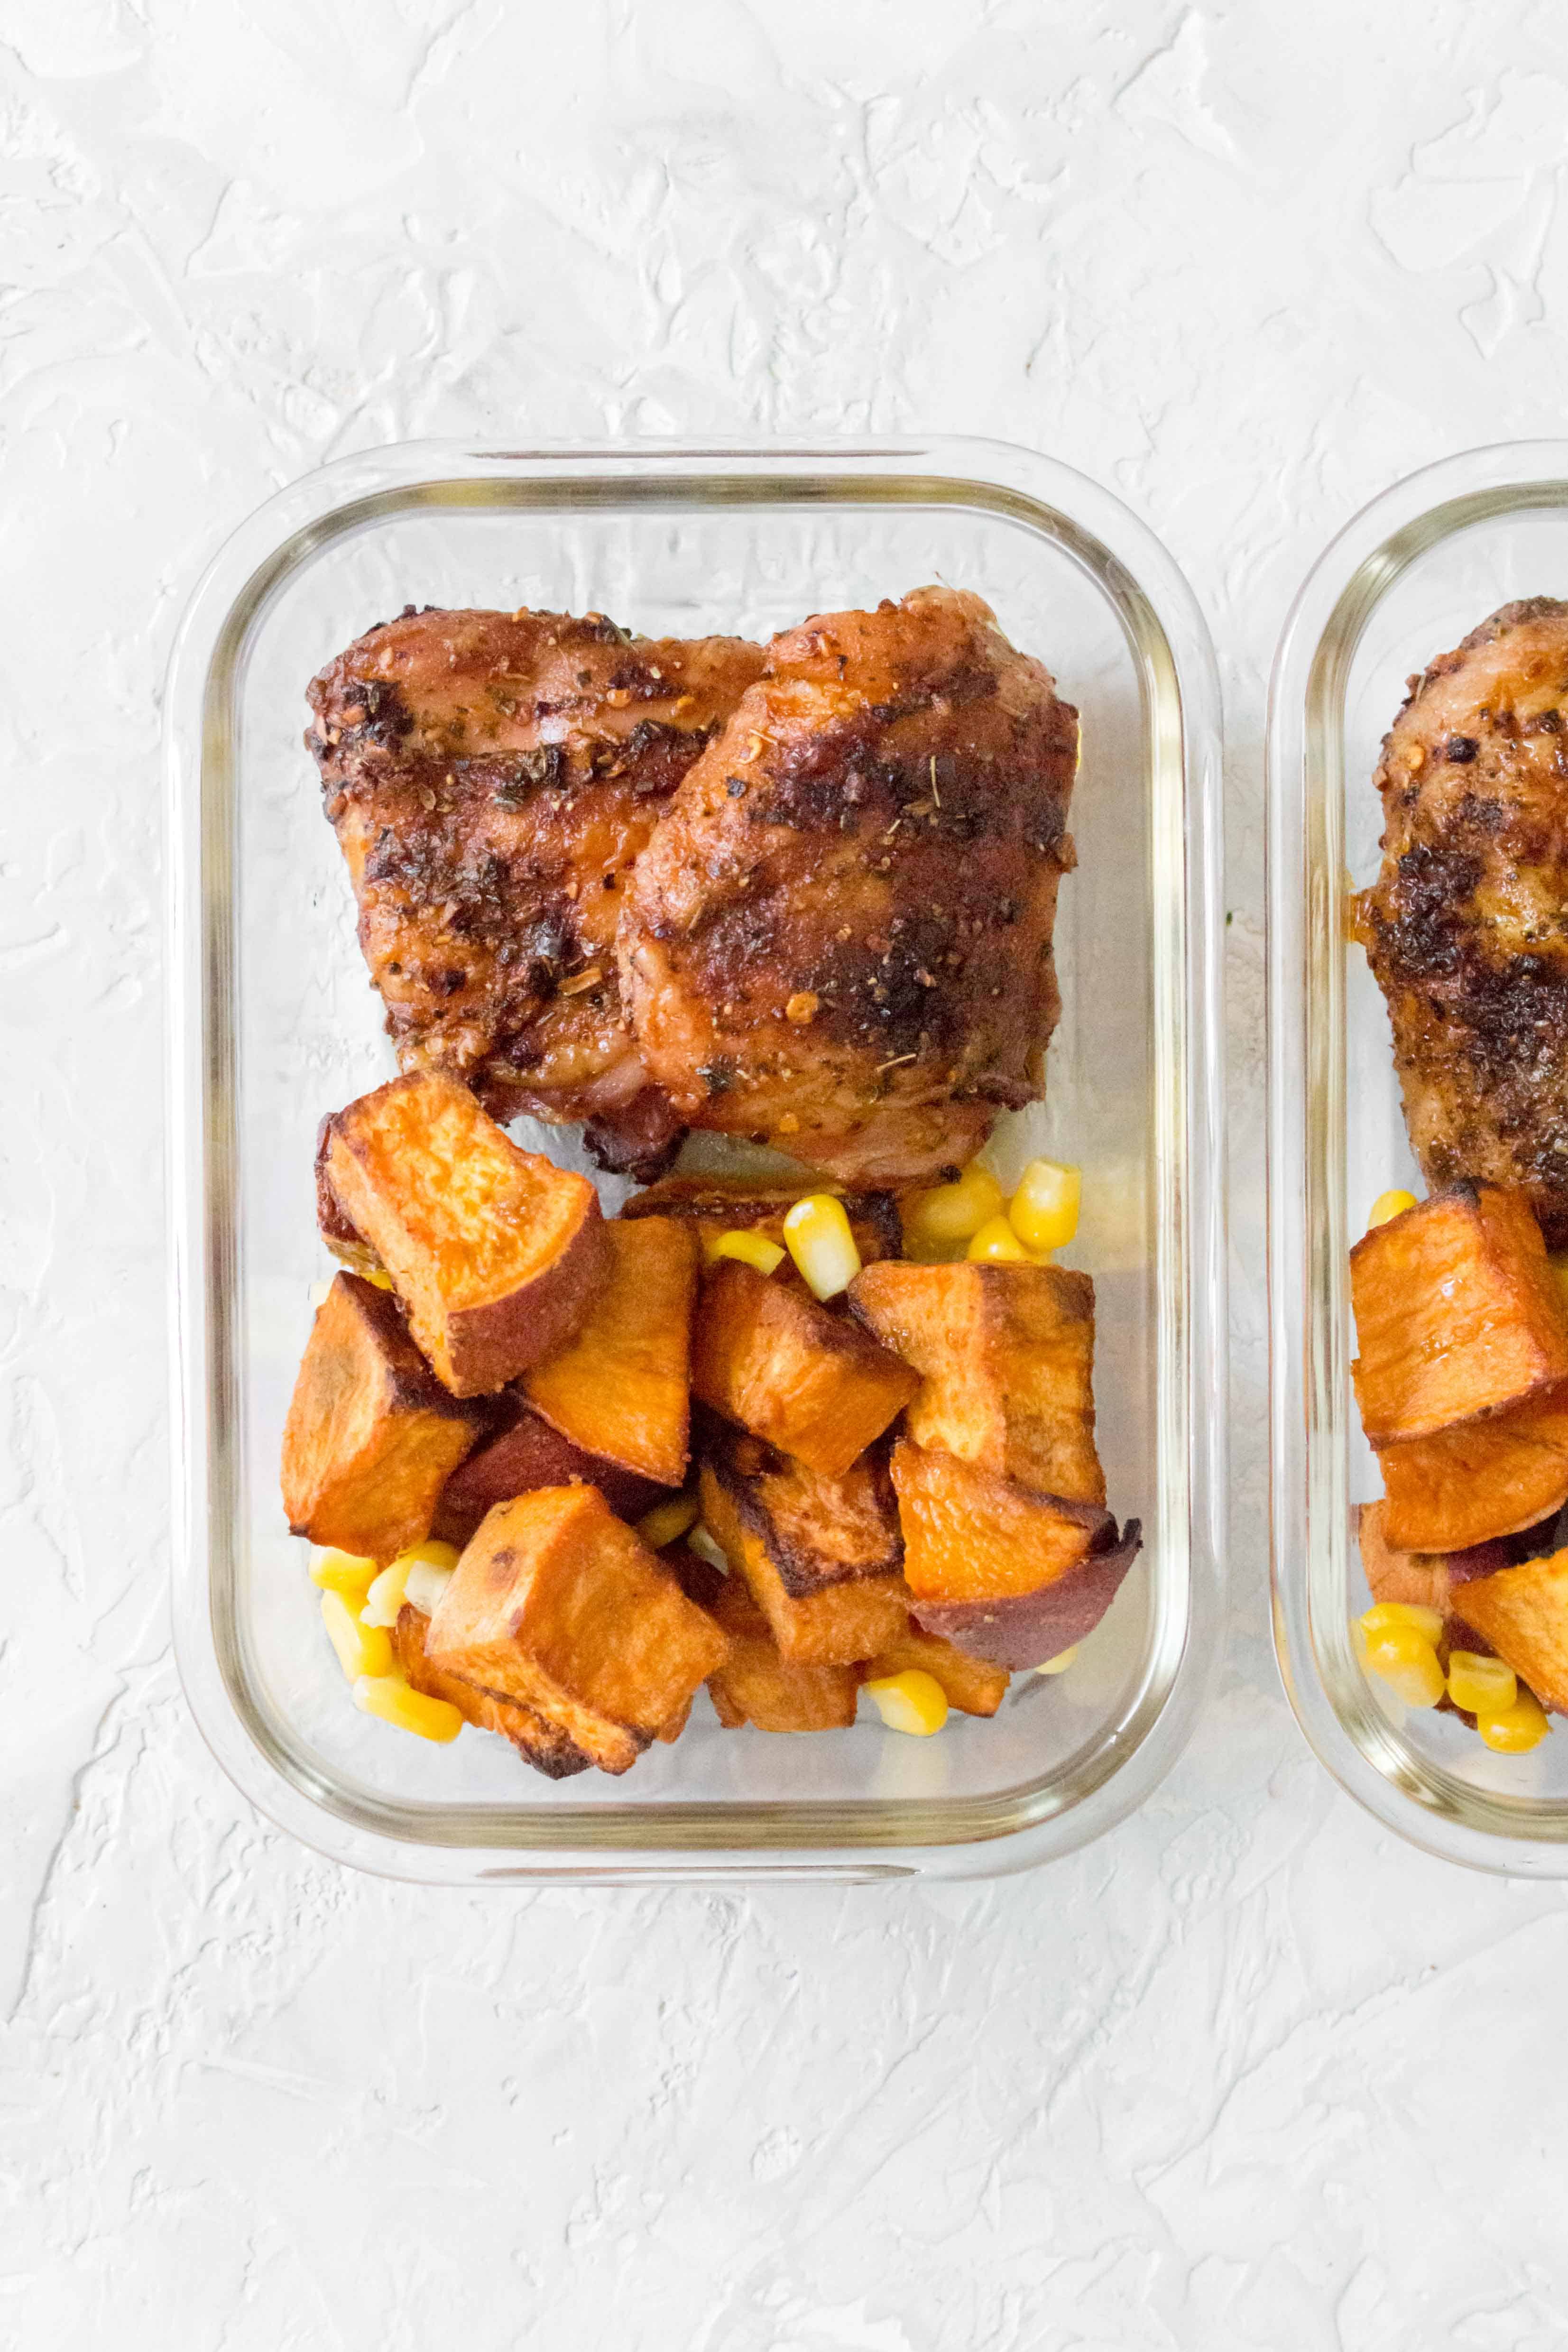 roasted cajun chicken thighs with sweet potato and corn meal prep